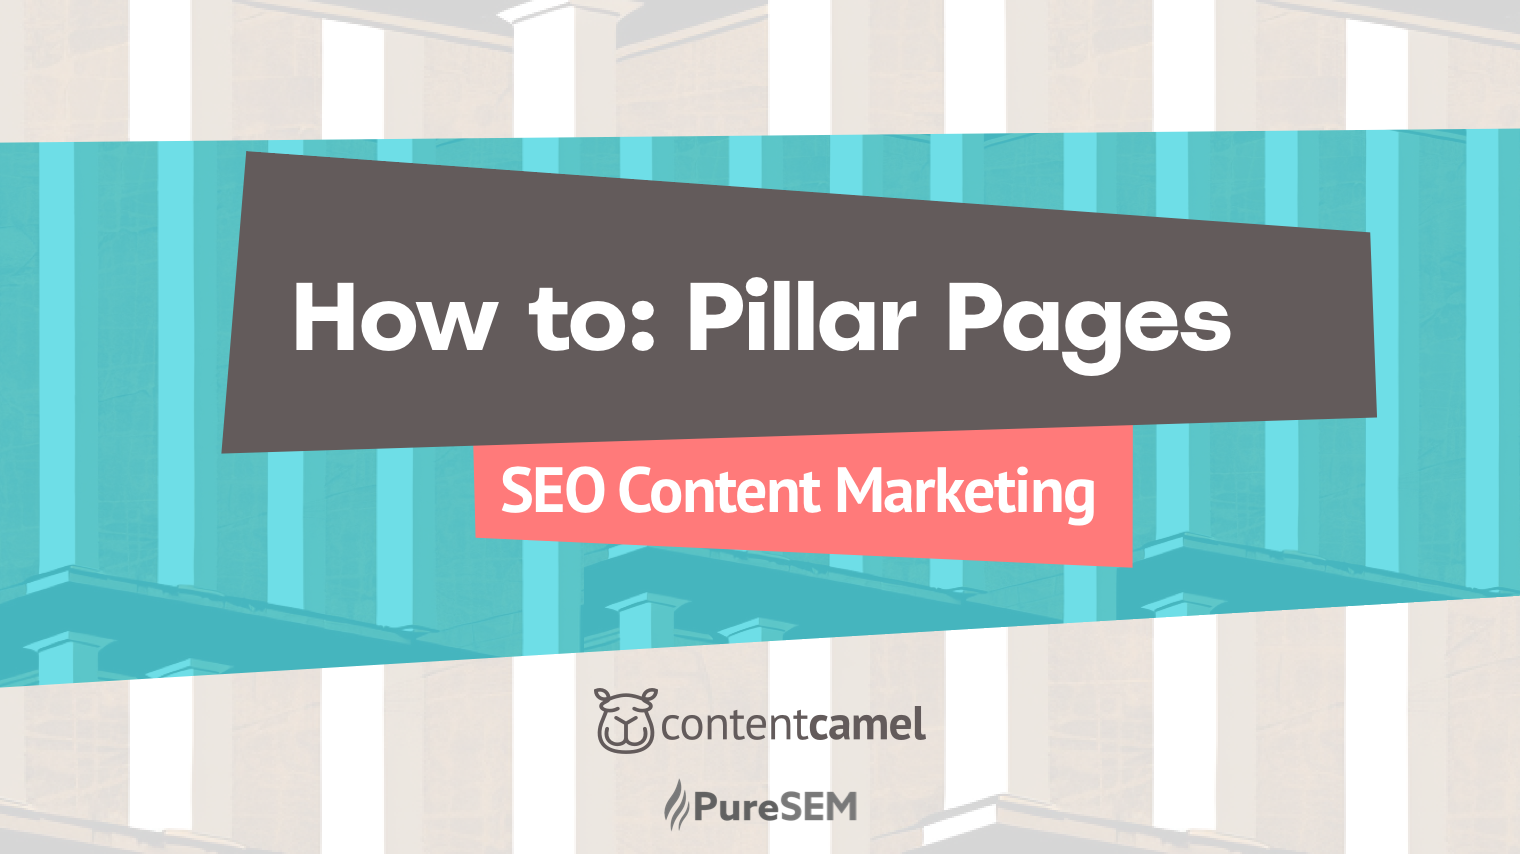 How to create SEO-Focused Pillar Pages that work